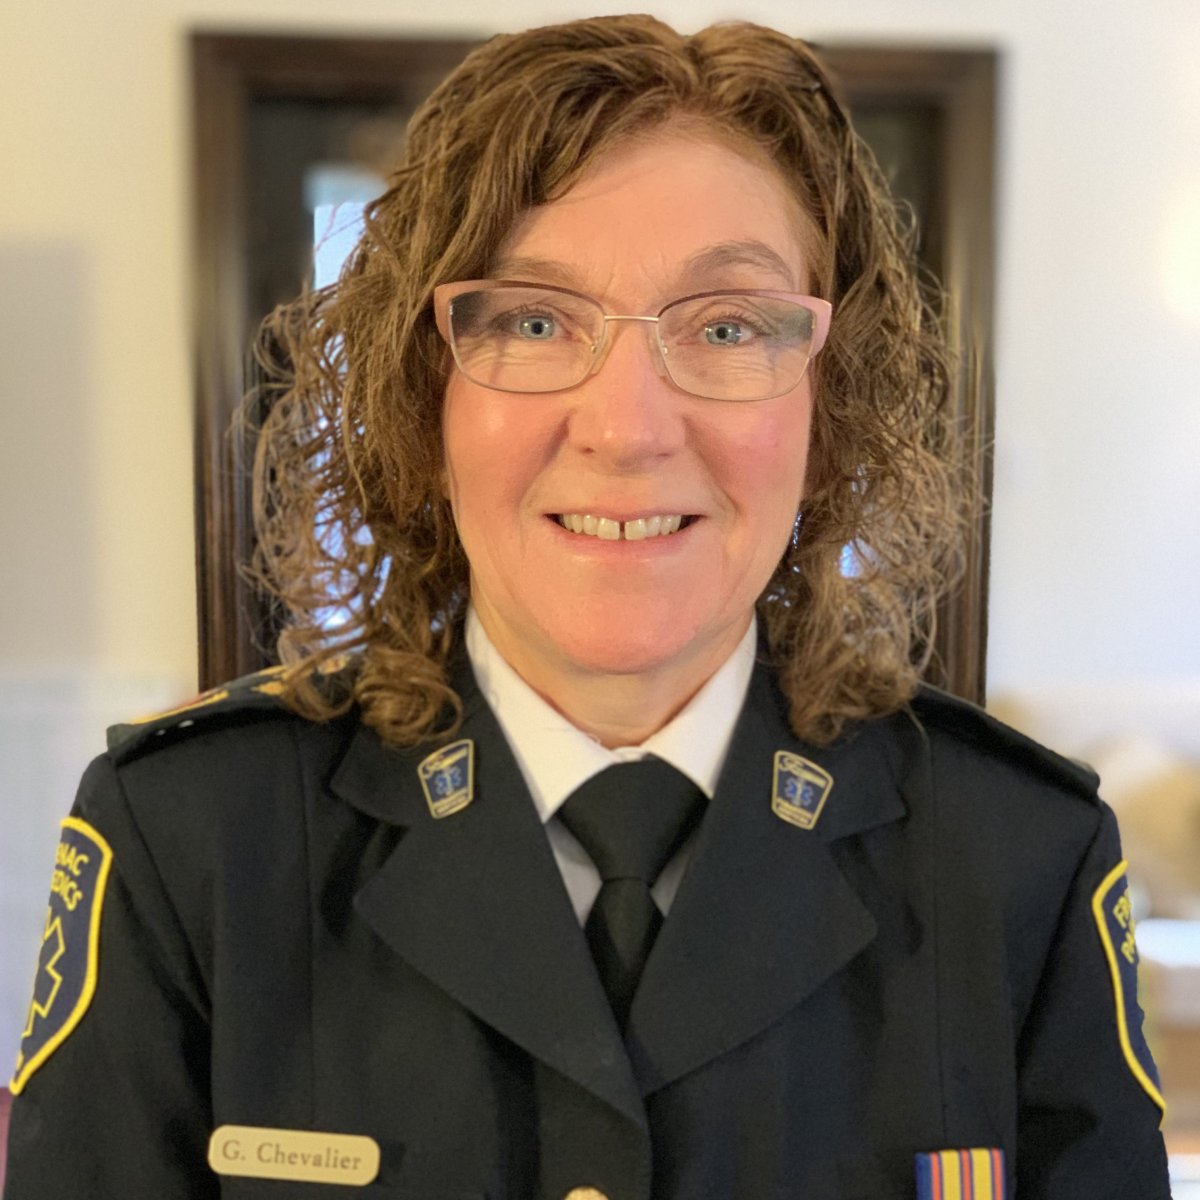 Gale Chevalier has spent the last quarter of a century with the Frontenac Paramedics, and this year, she was named as chief. In her first year in the top spot, Chevalier looks back at how thins have changed over the last decade for local paramedics, and what she hopes for the service in the coming decade.